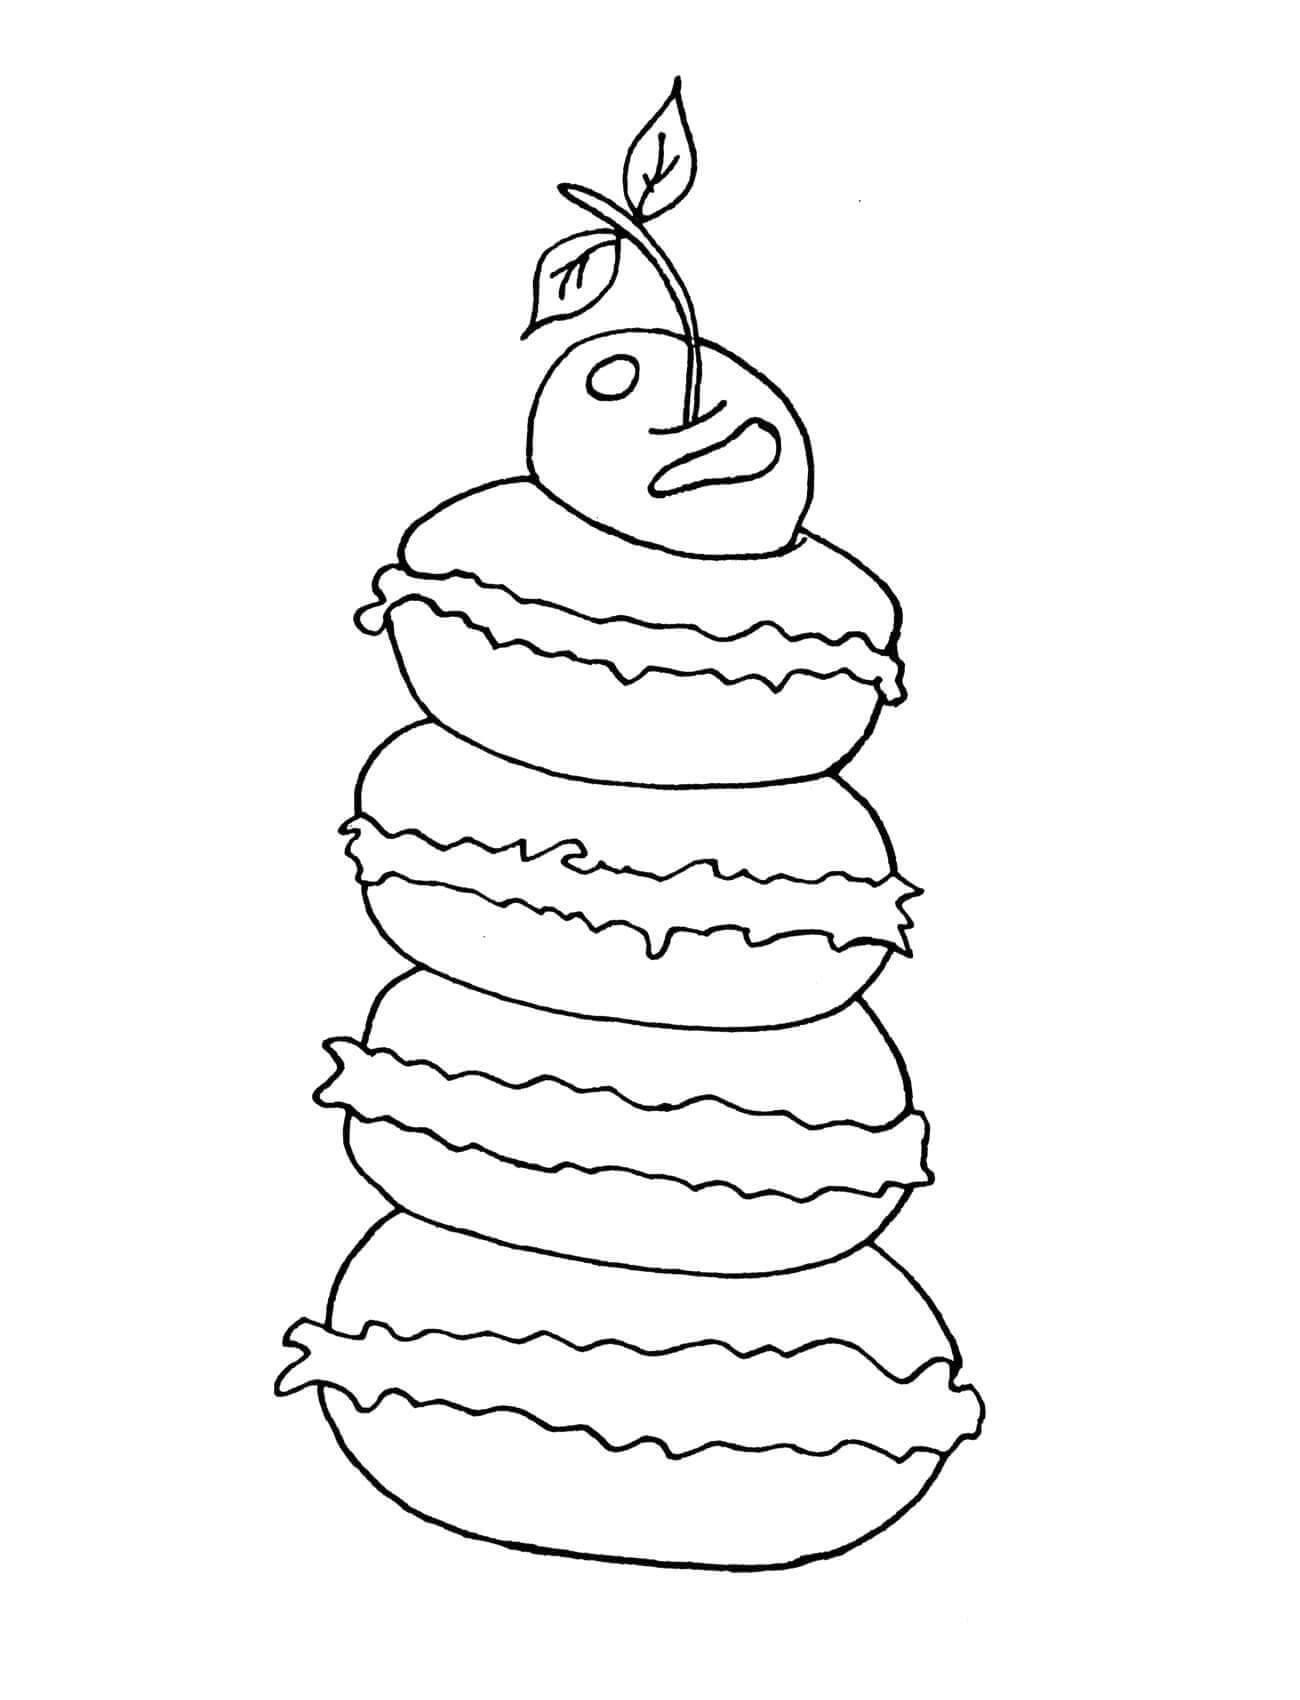 Download Macarons With Cherry Coloring Page - Free Coloring Pages Online